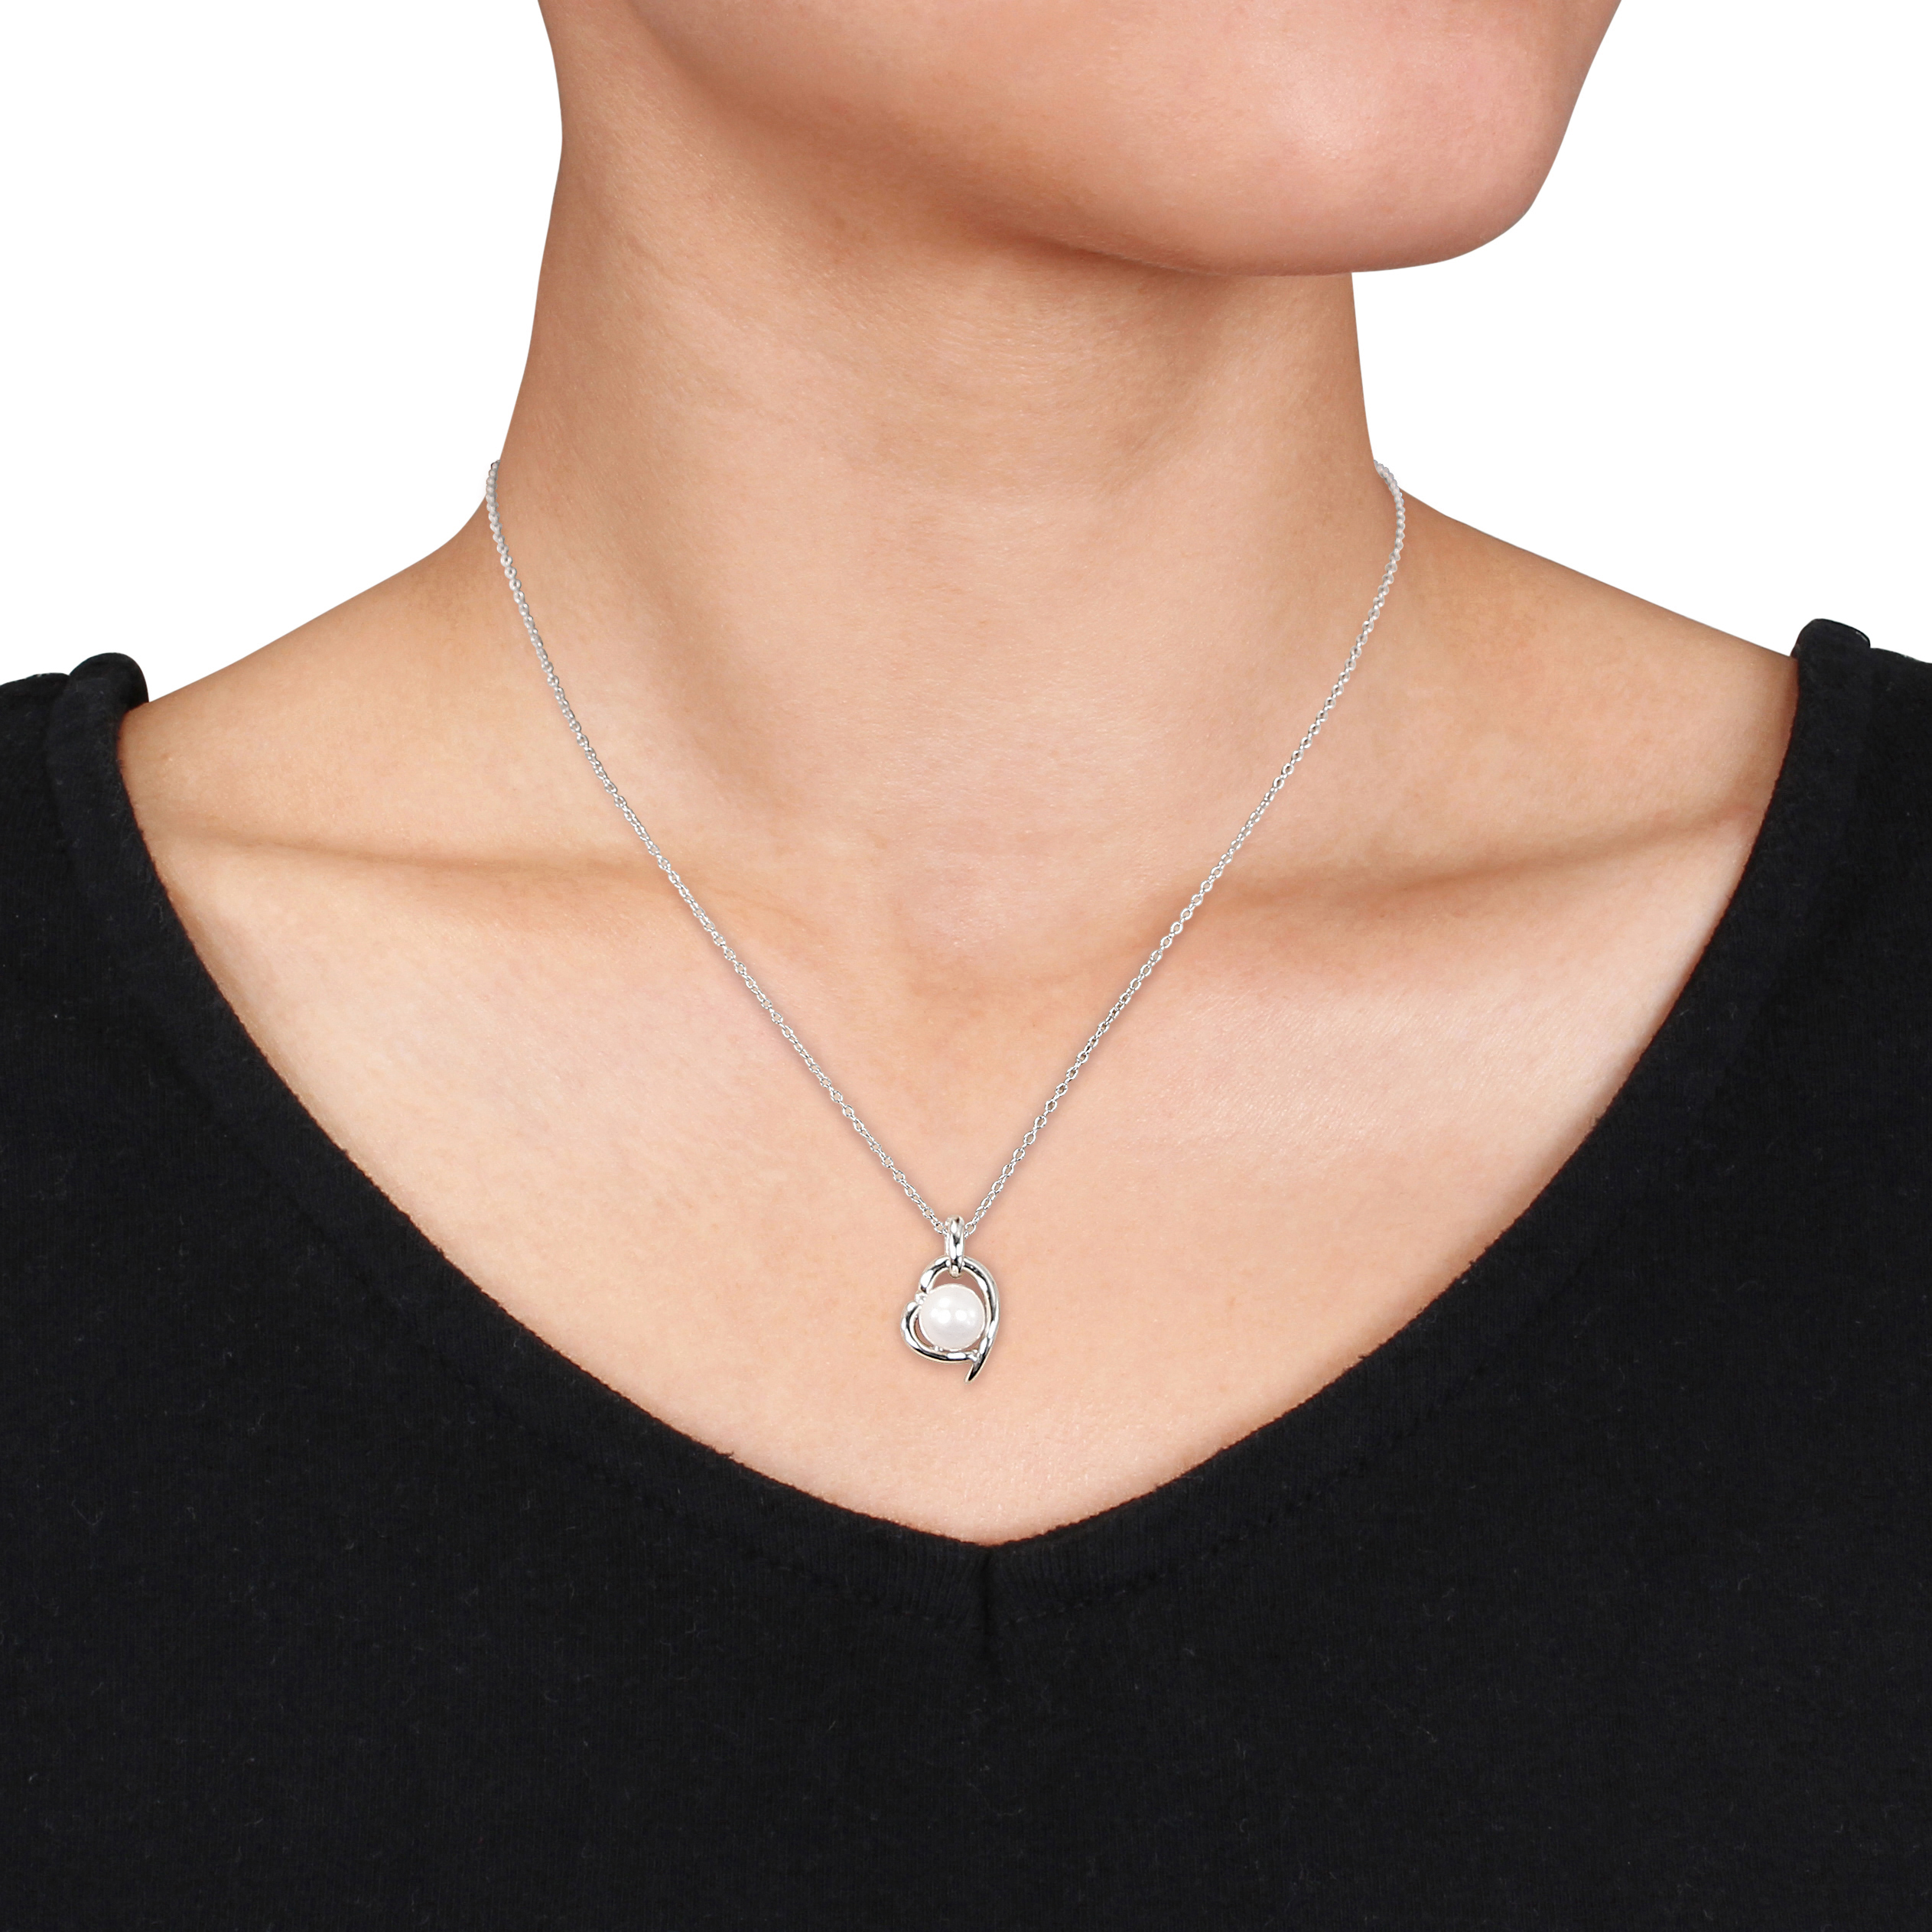 8.5 - 9 MM White Cultured Freshwater Pearl and Diamond Heart Pendant with Chain in Sterling Silver - 18 in.